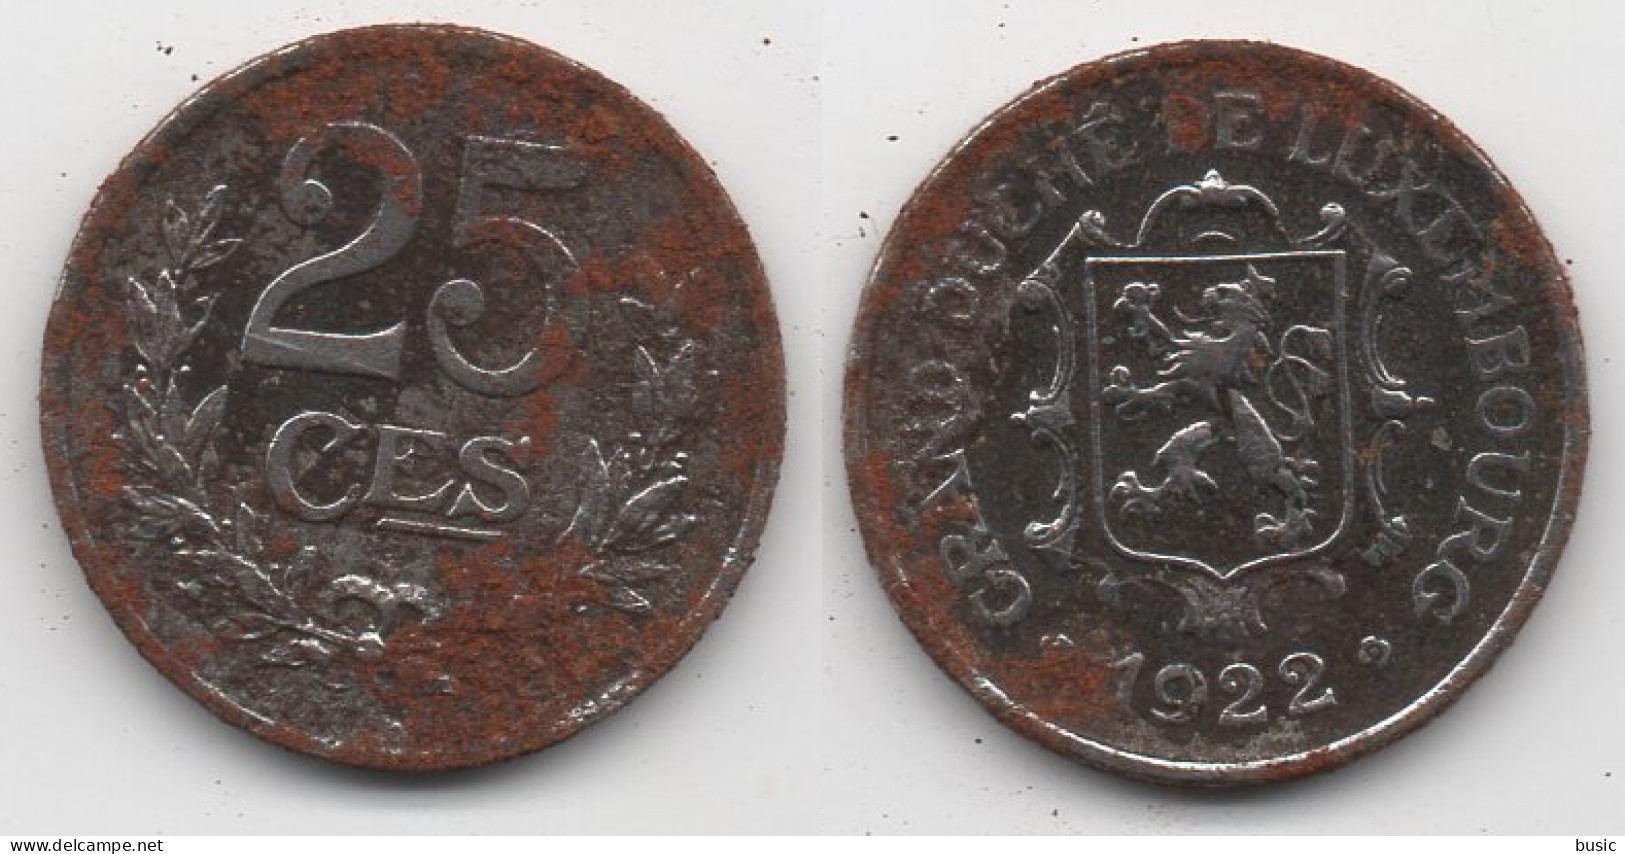 + LUXEMBOURG + 25 CENTIMES 1922 + - Luxemburg